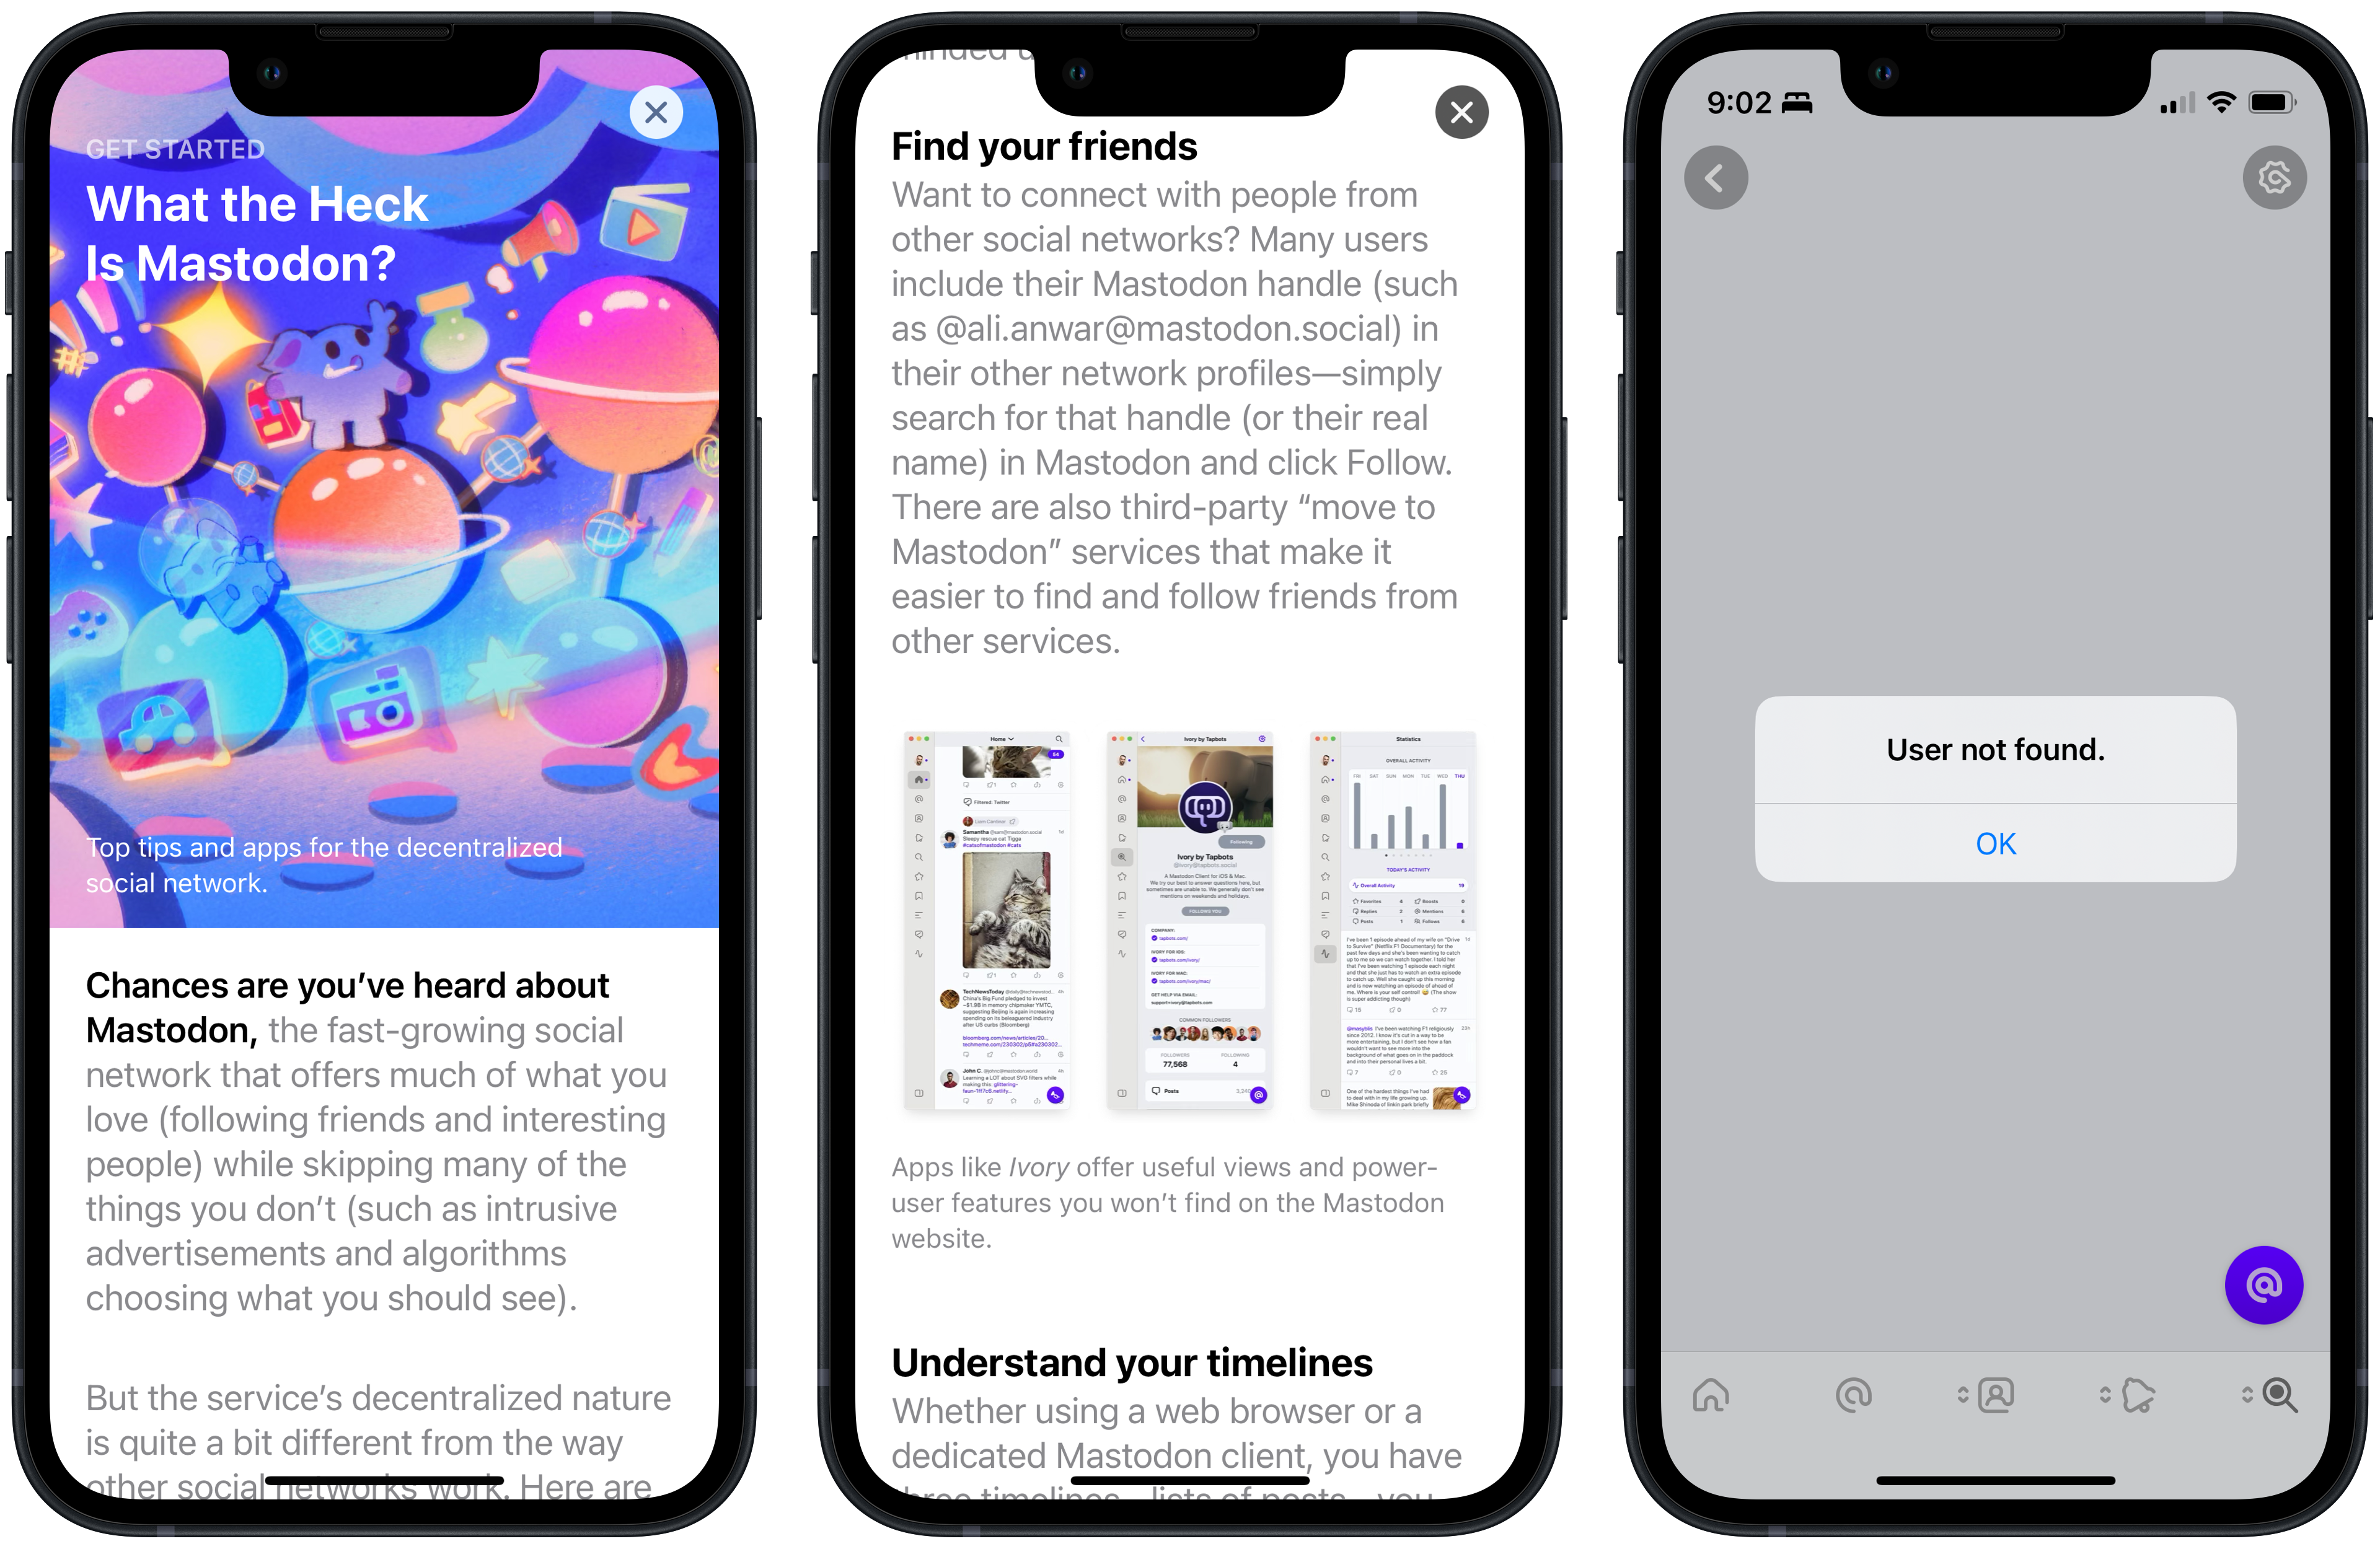 App Store story explaining Mastodon, and mentioning the @ali.anwar@mastodon.social account. Later, a search for that account results in no user found.